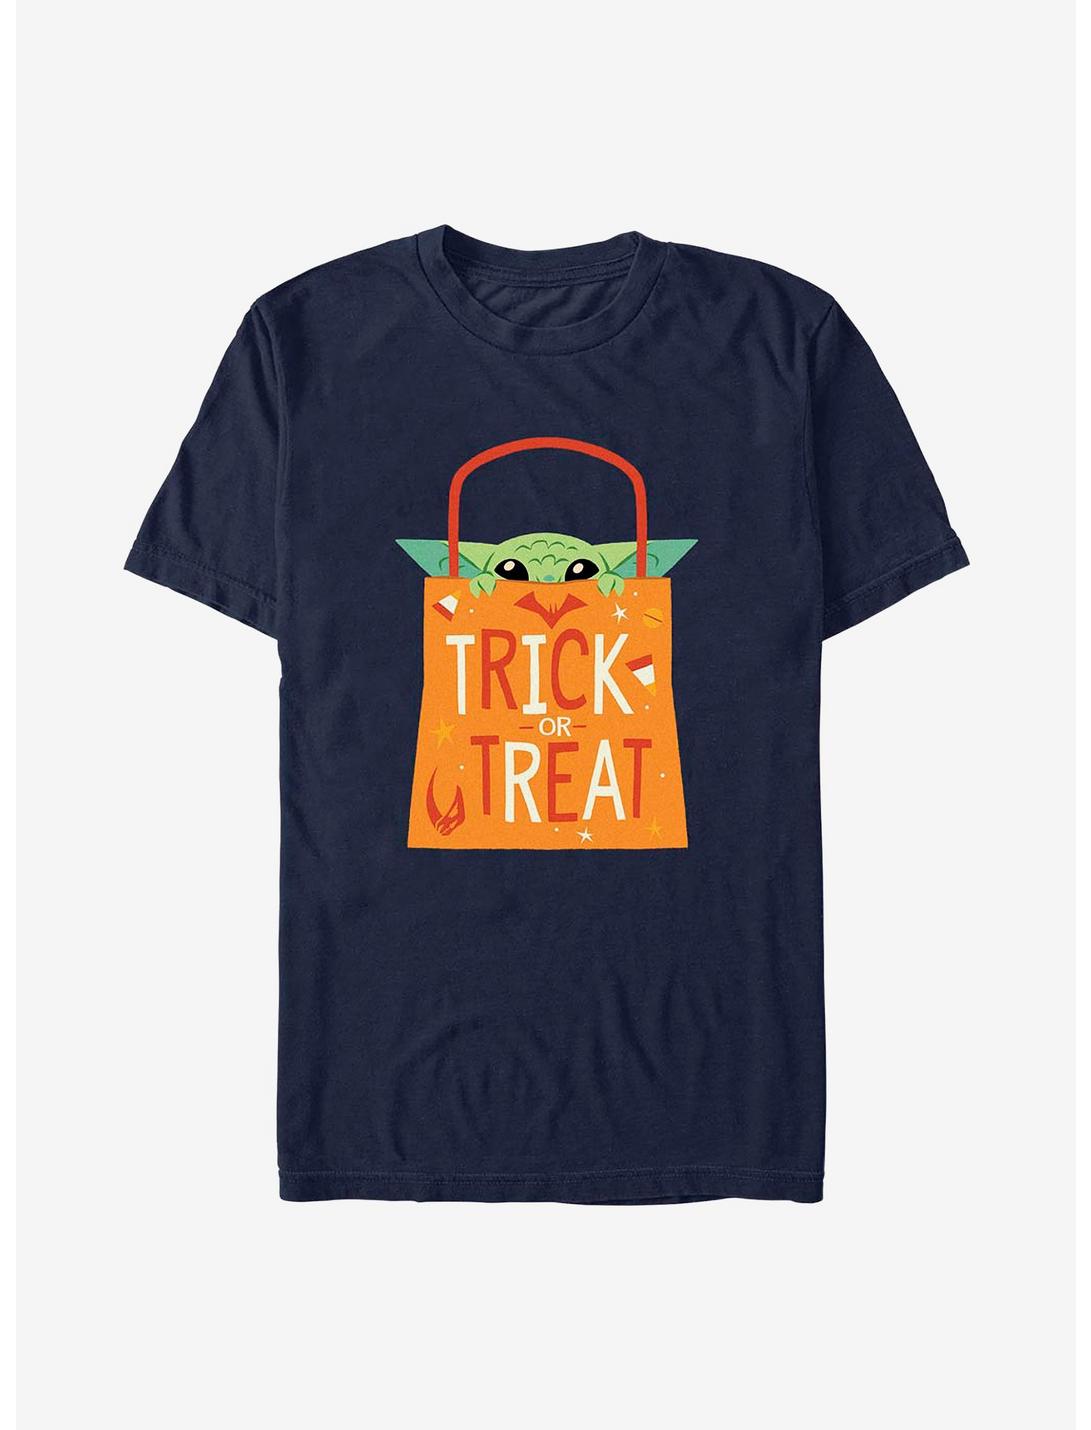 Star Wars The Mandalorian The Child Trick Or Treat T-Shirt, NAVY, hi-res